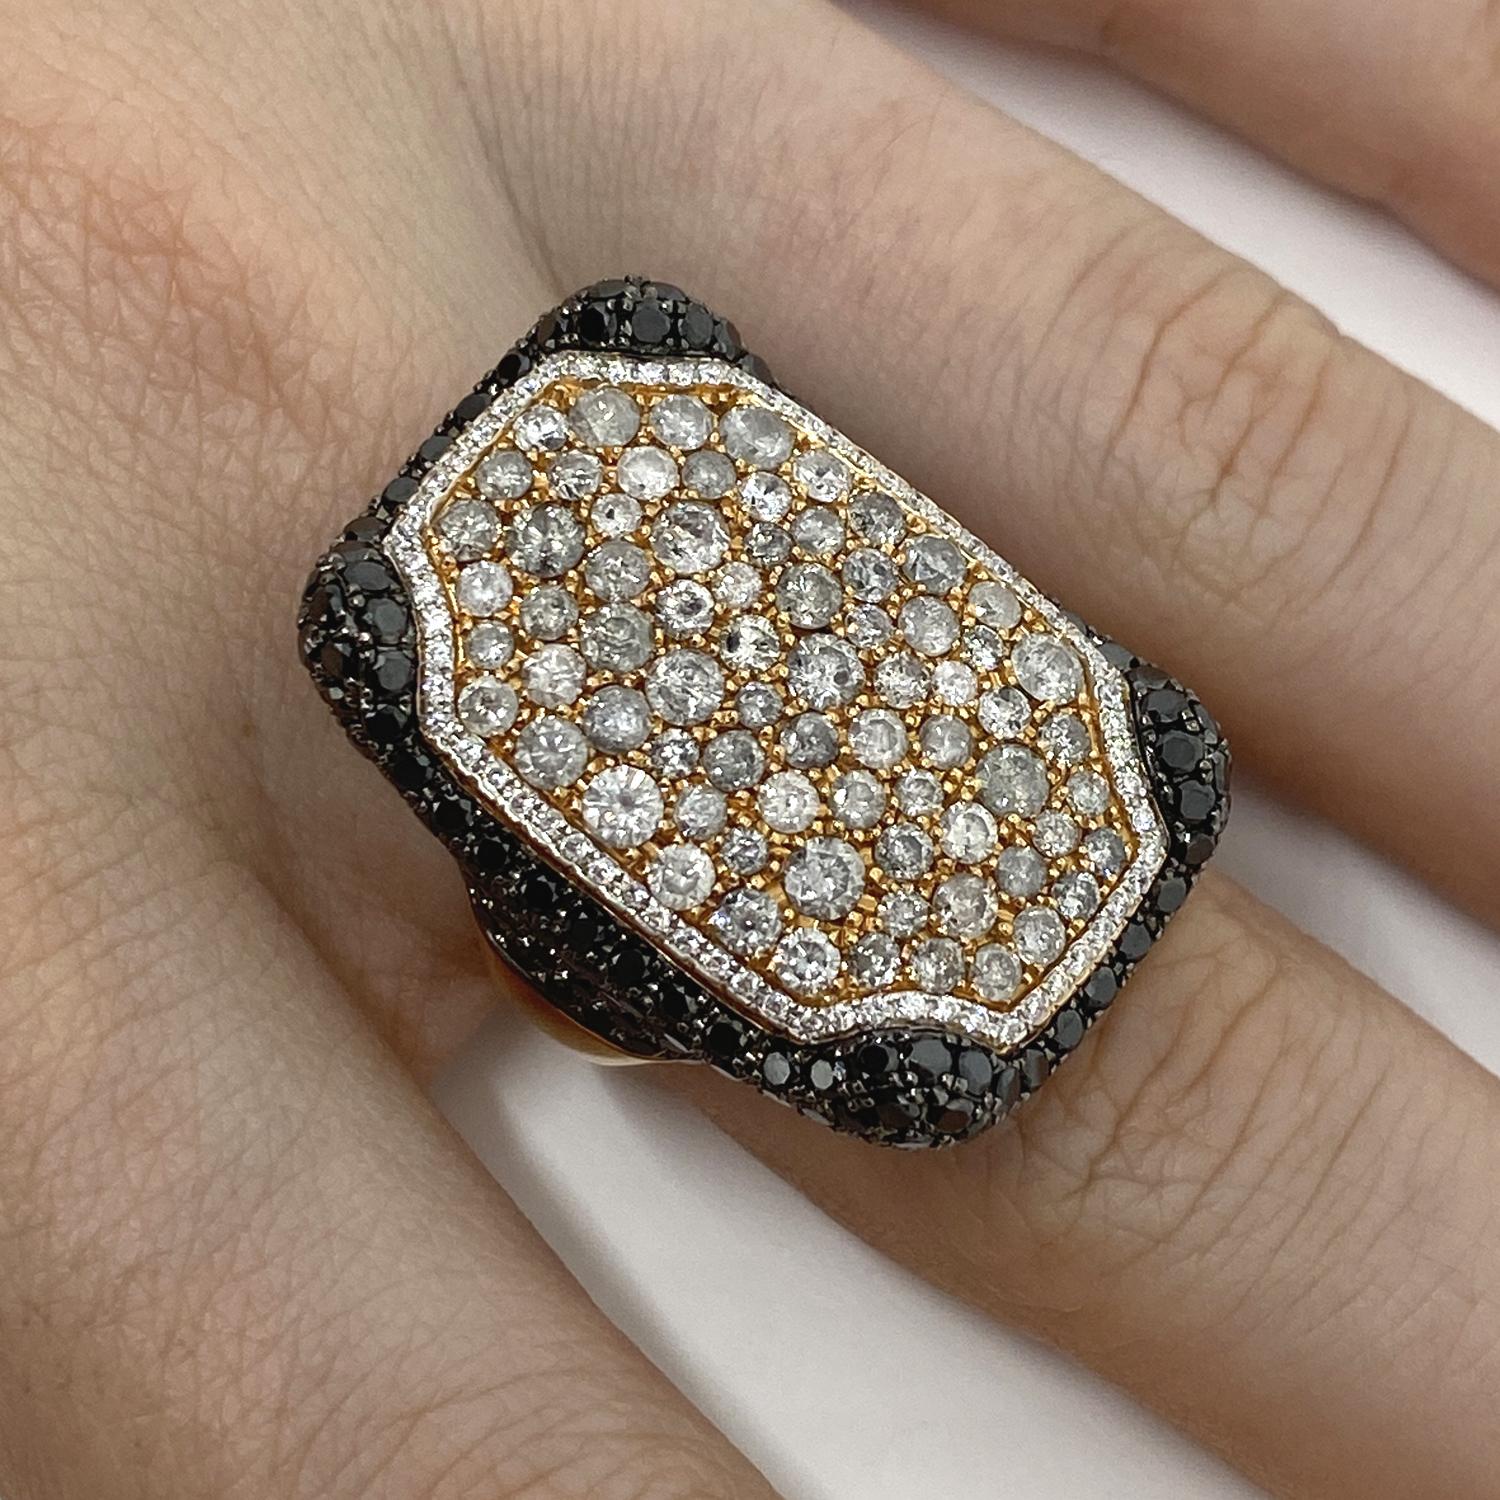 Ring made of 18 kt rose gold paved with natural grey diamonds for ct.2.81 black for ct .3.74 and white for ct .0.20

Welcome to our jewelry collection, where every piece tells a story of timeless elegance and unparalleled craftsmanship. As a